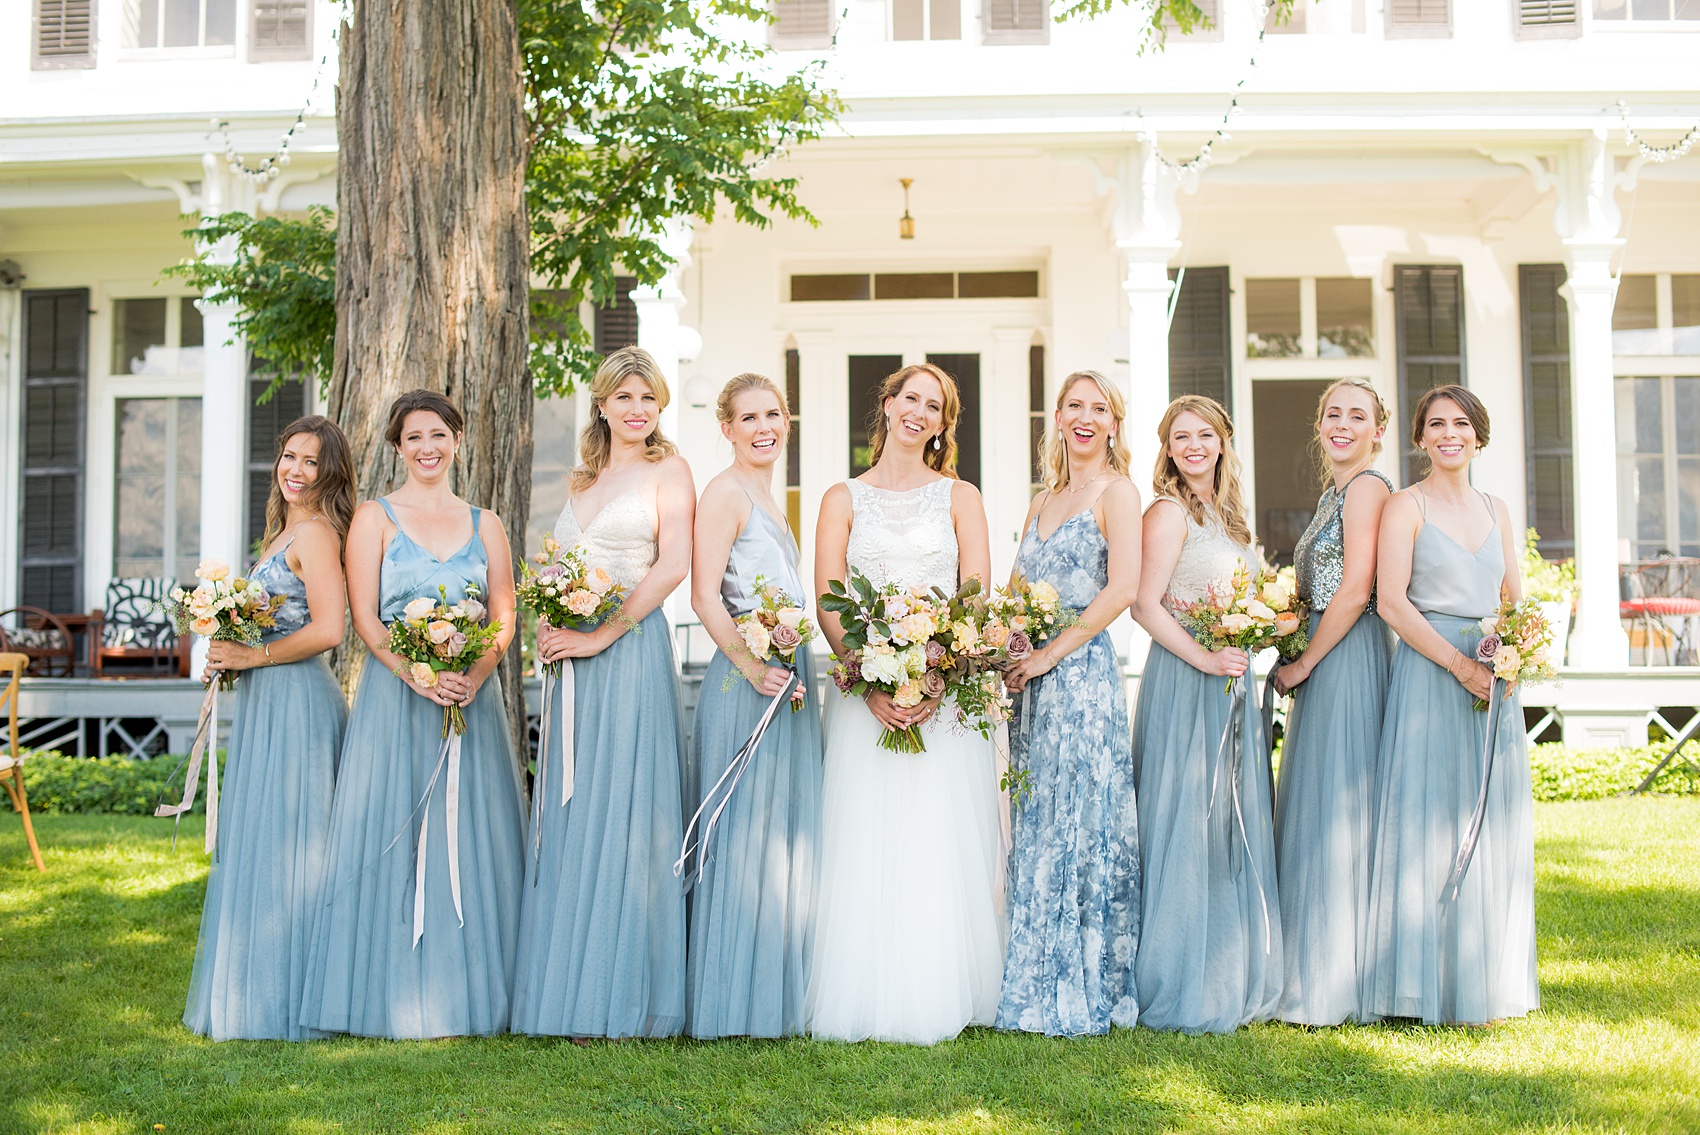 Mikkel Paige Photography photos from a Southwood Estate Wedding in Germantown, New York in the Hudson Valley. Picture of the bride and her bridal party. Her bridesmaids wore cornflower blue skirts with mismatched tops.